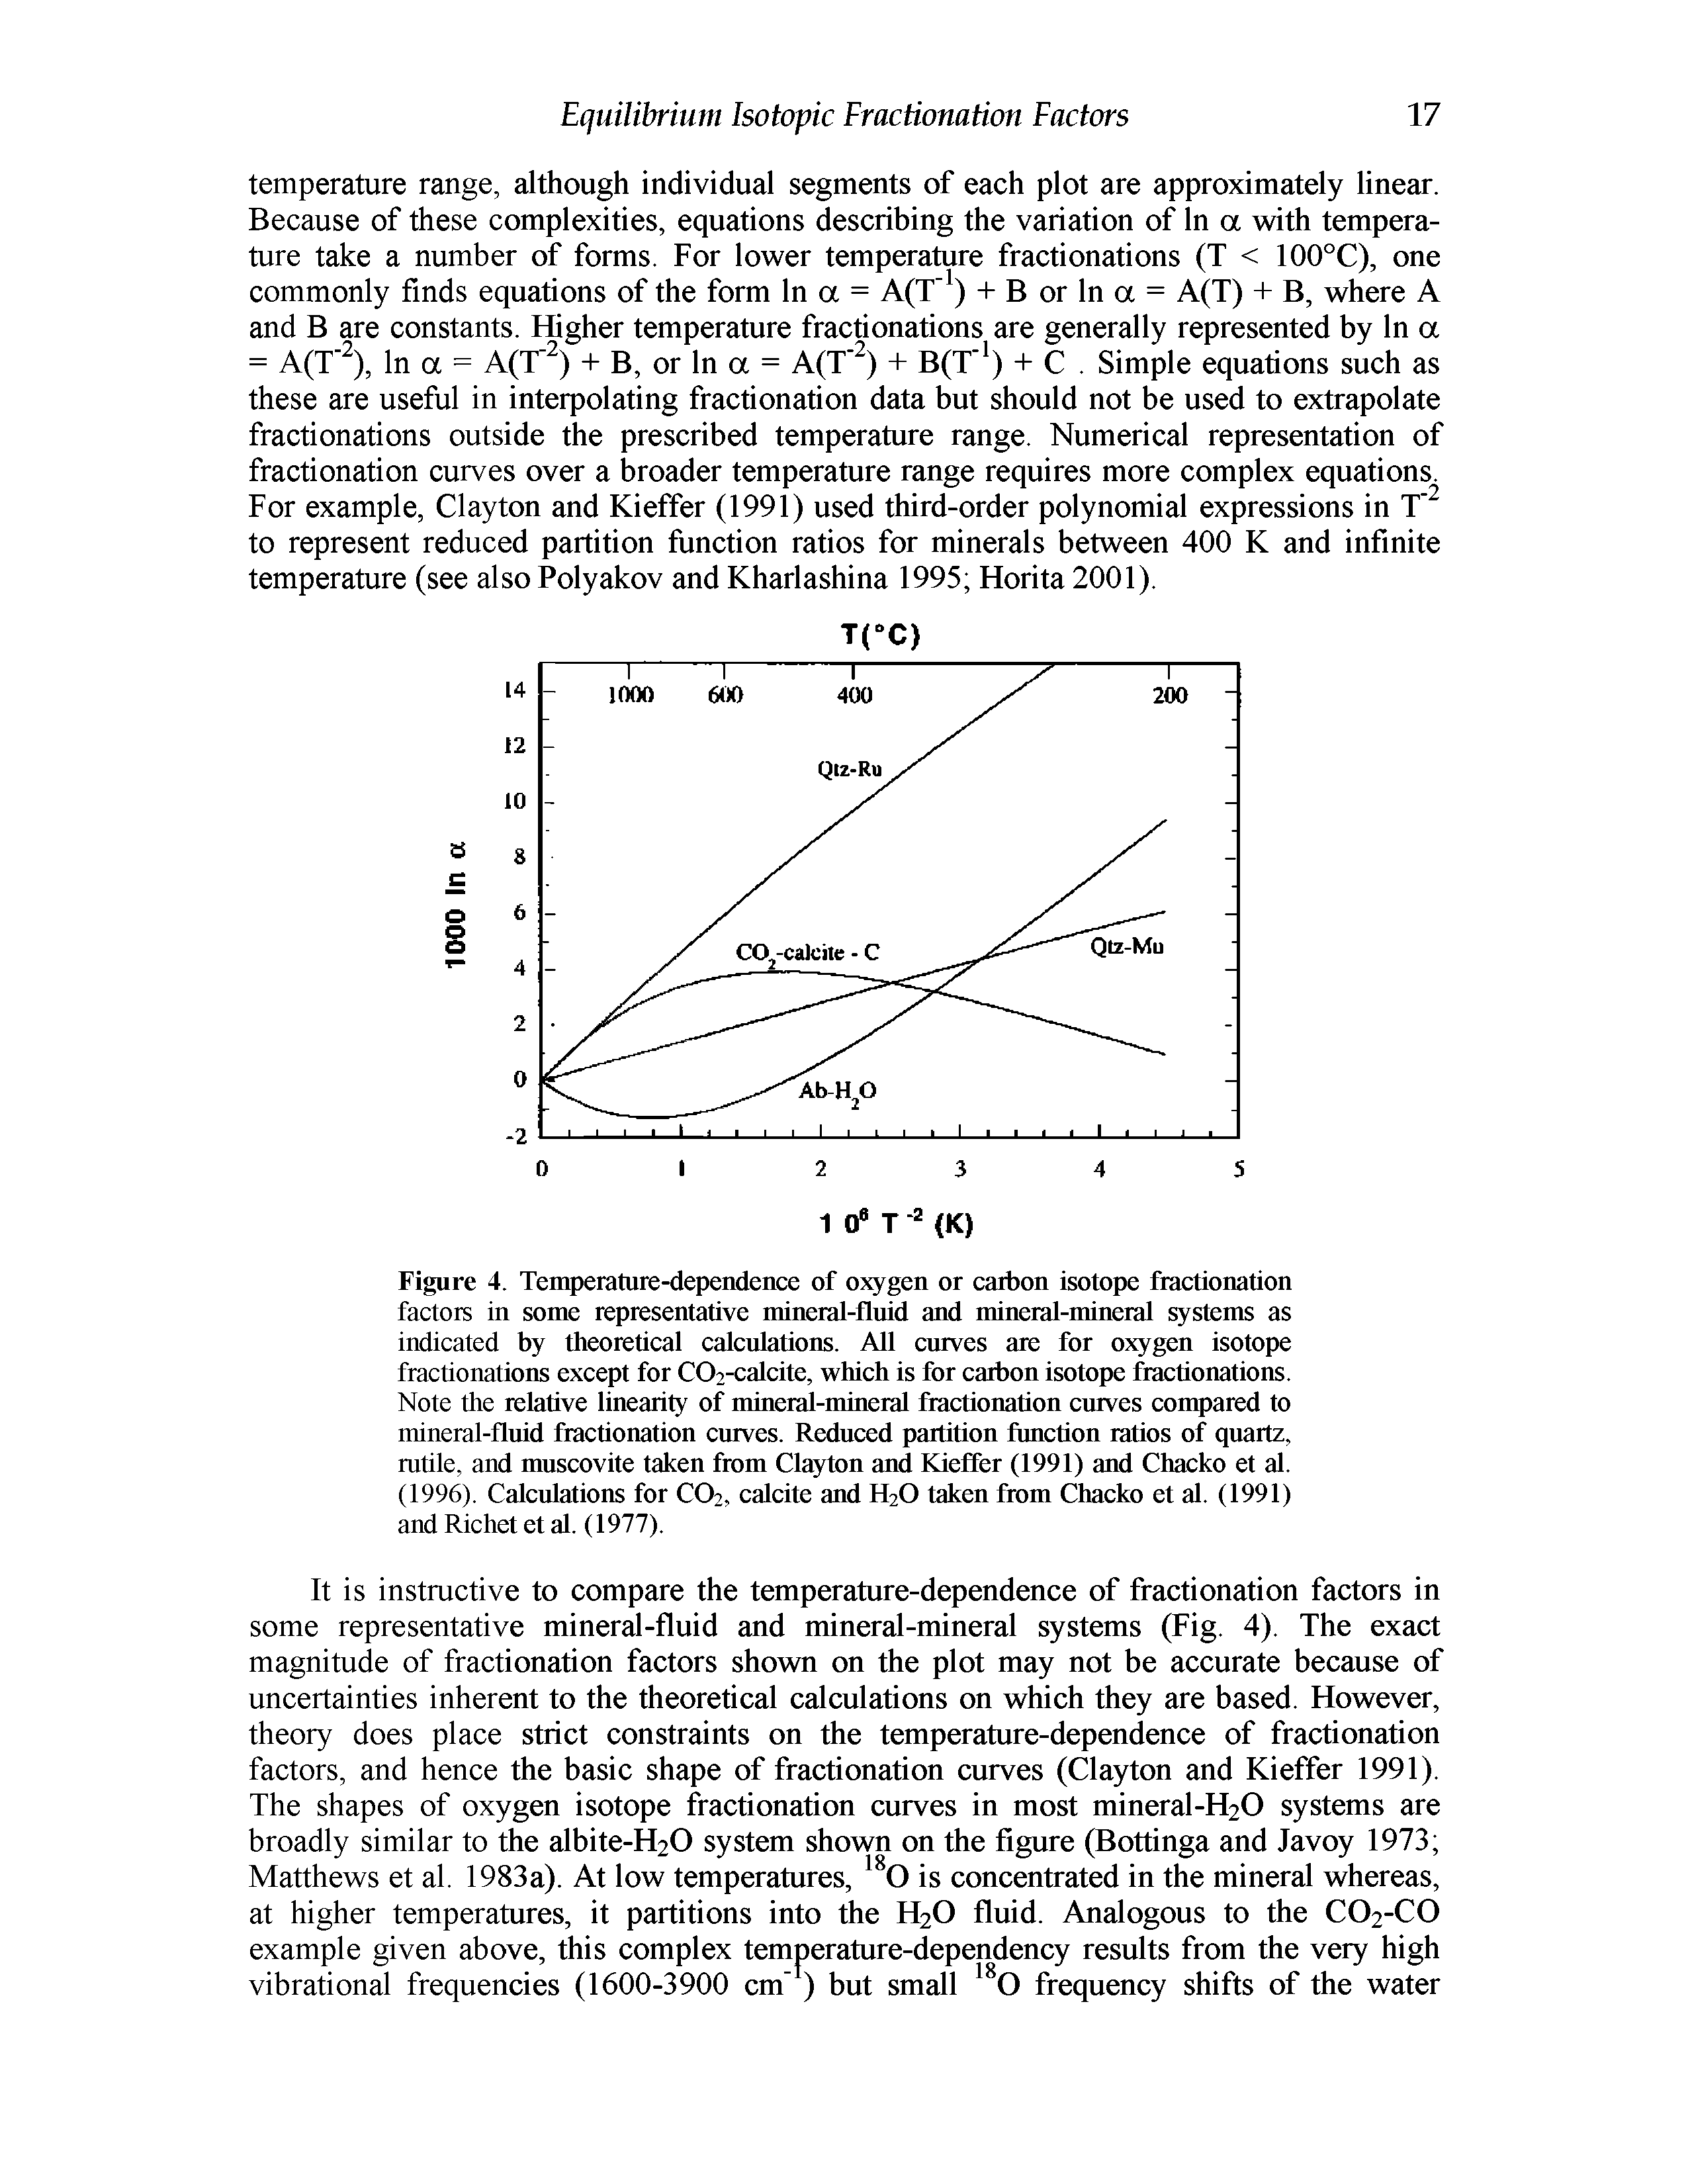 Figure 4. Temperature-dependence of oxygen or carbon isotope fractionation factors in some representative mineral-fluid and mineral-mineral systems as indicated by theoretical calculations. All curves are for oxygen isotope fractionations except for C02-calcite, which is for carbon isotope fractionations.